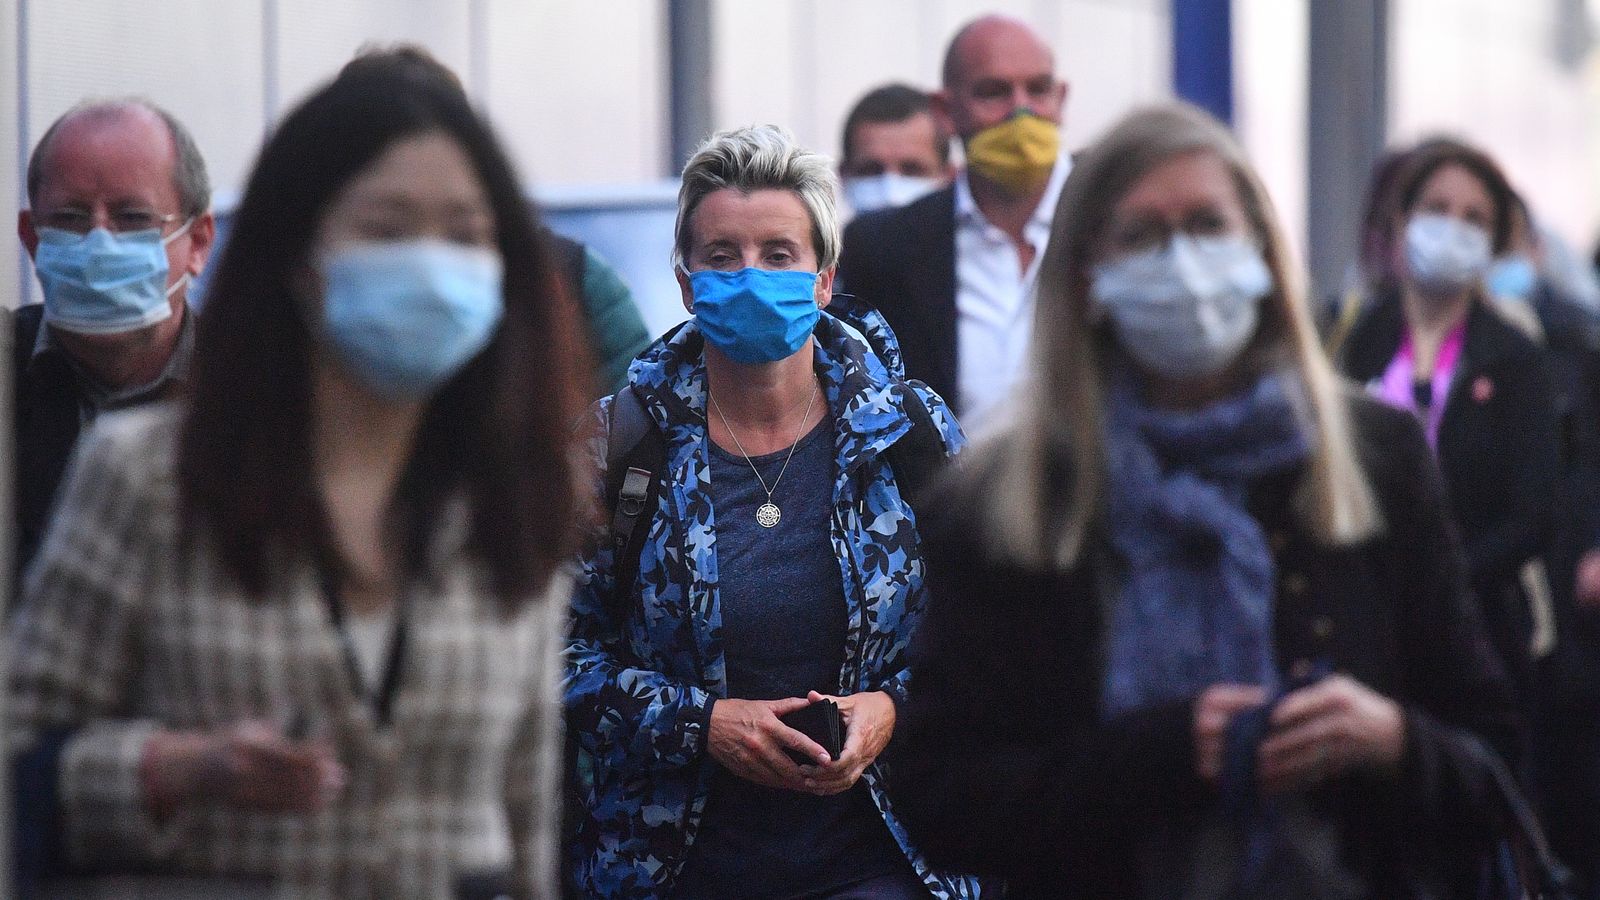 UKHSA warns adults to 'stay home' or 'wear face covering' when going out if feeling unwell